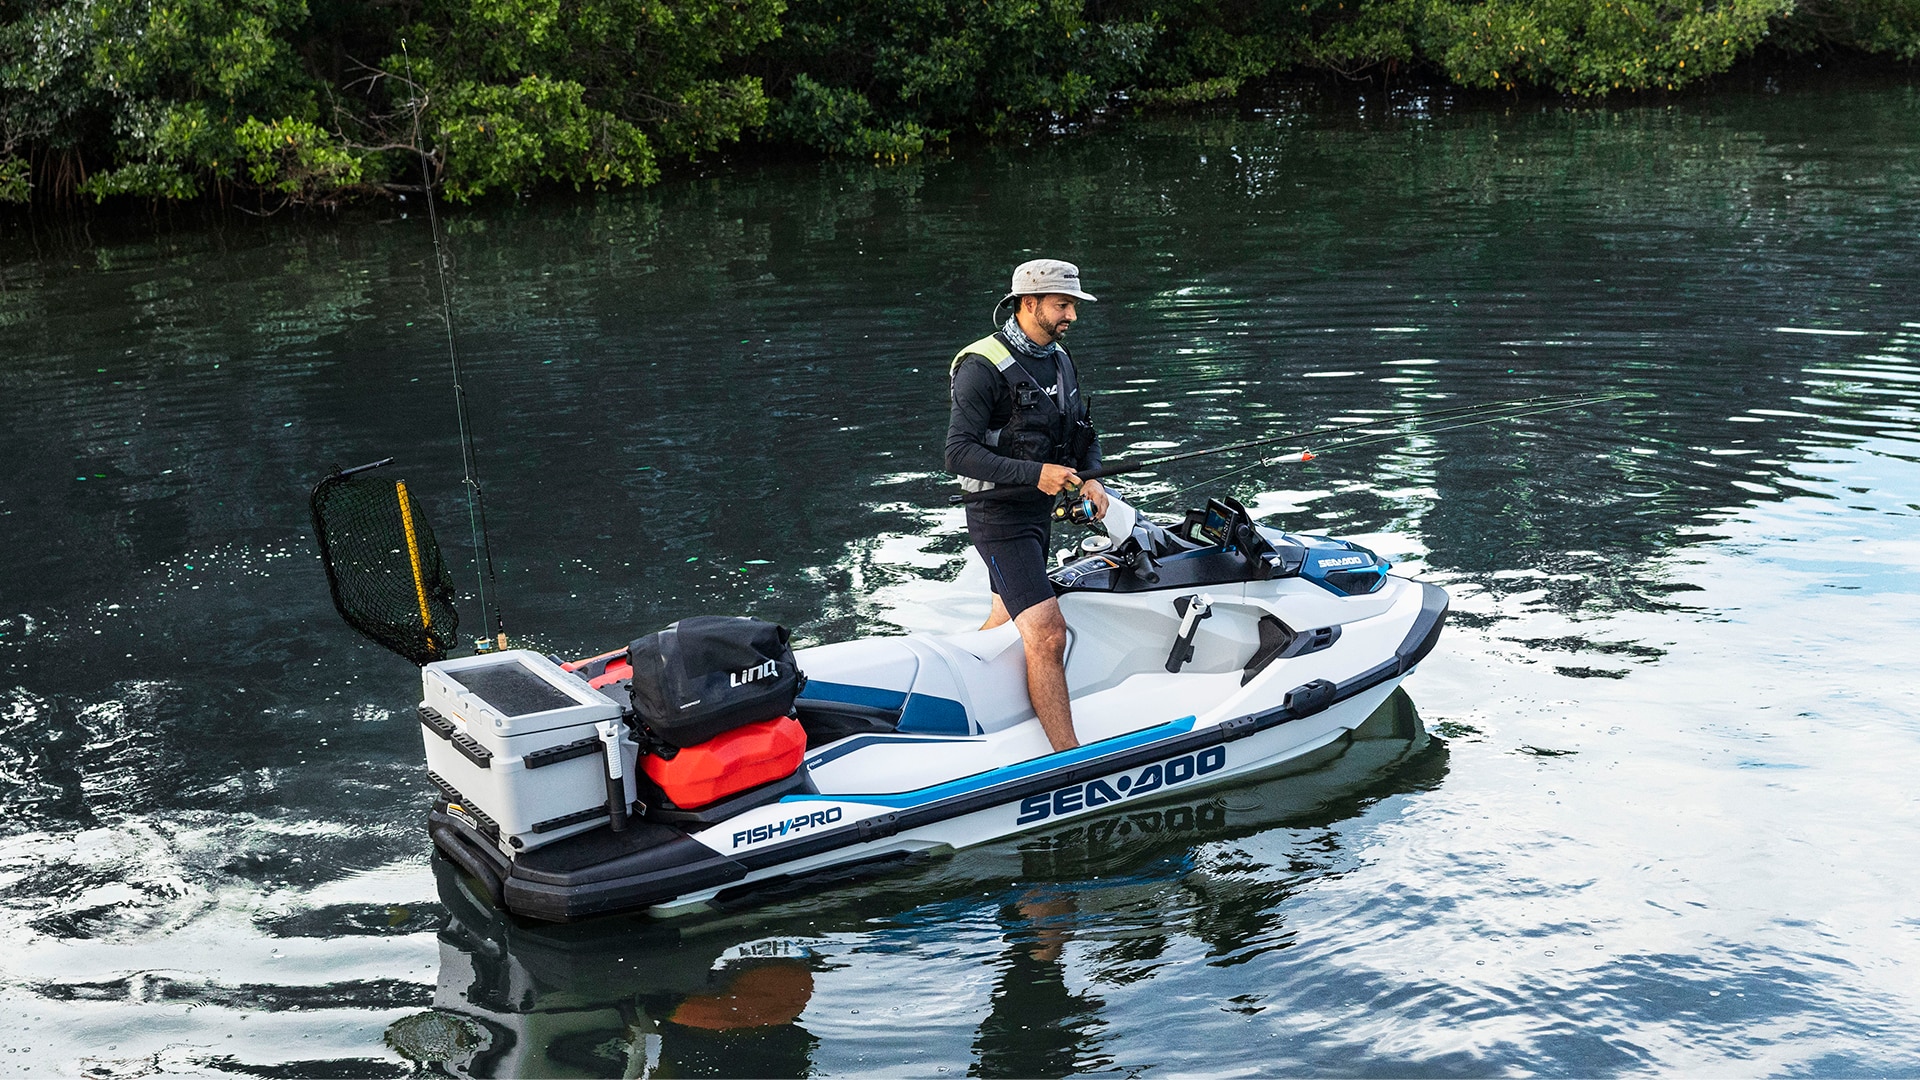 Man fishing from a fully equipped Sea-Doo FishPro Sport